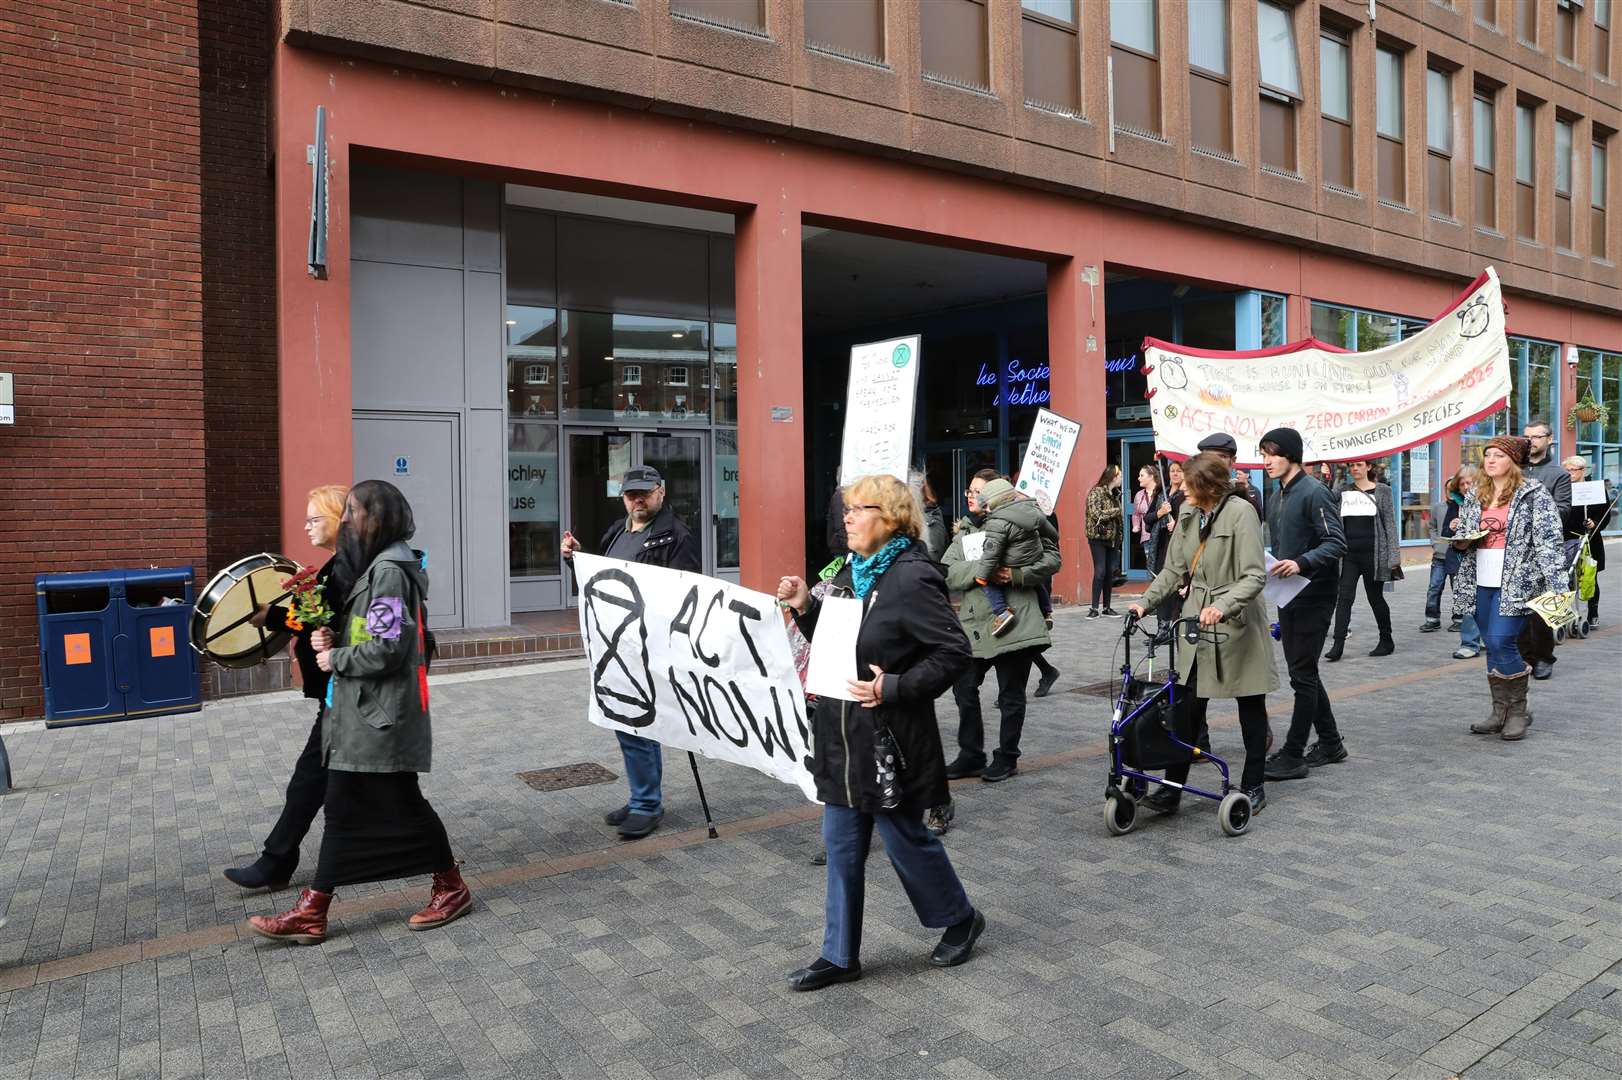 Extinction Rebellion members at a previous protest in Maidstone. Picture: Andy Jones